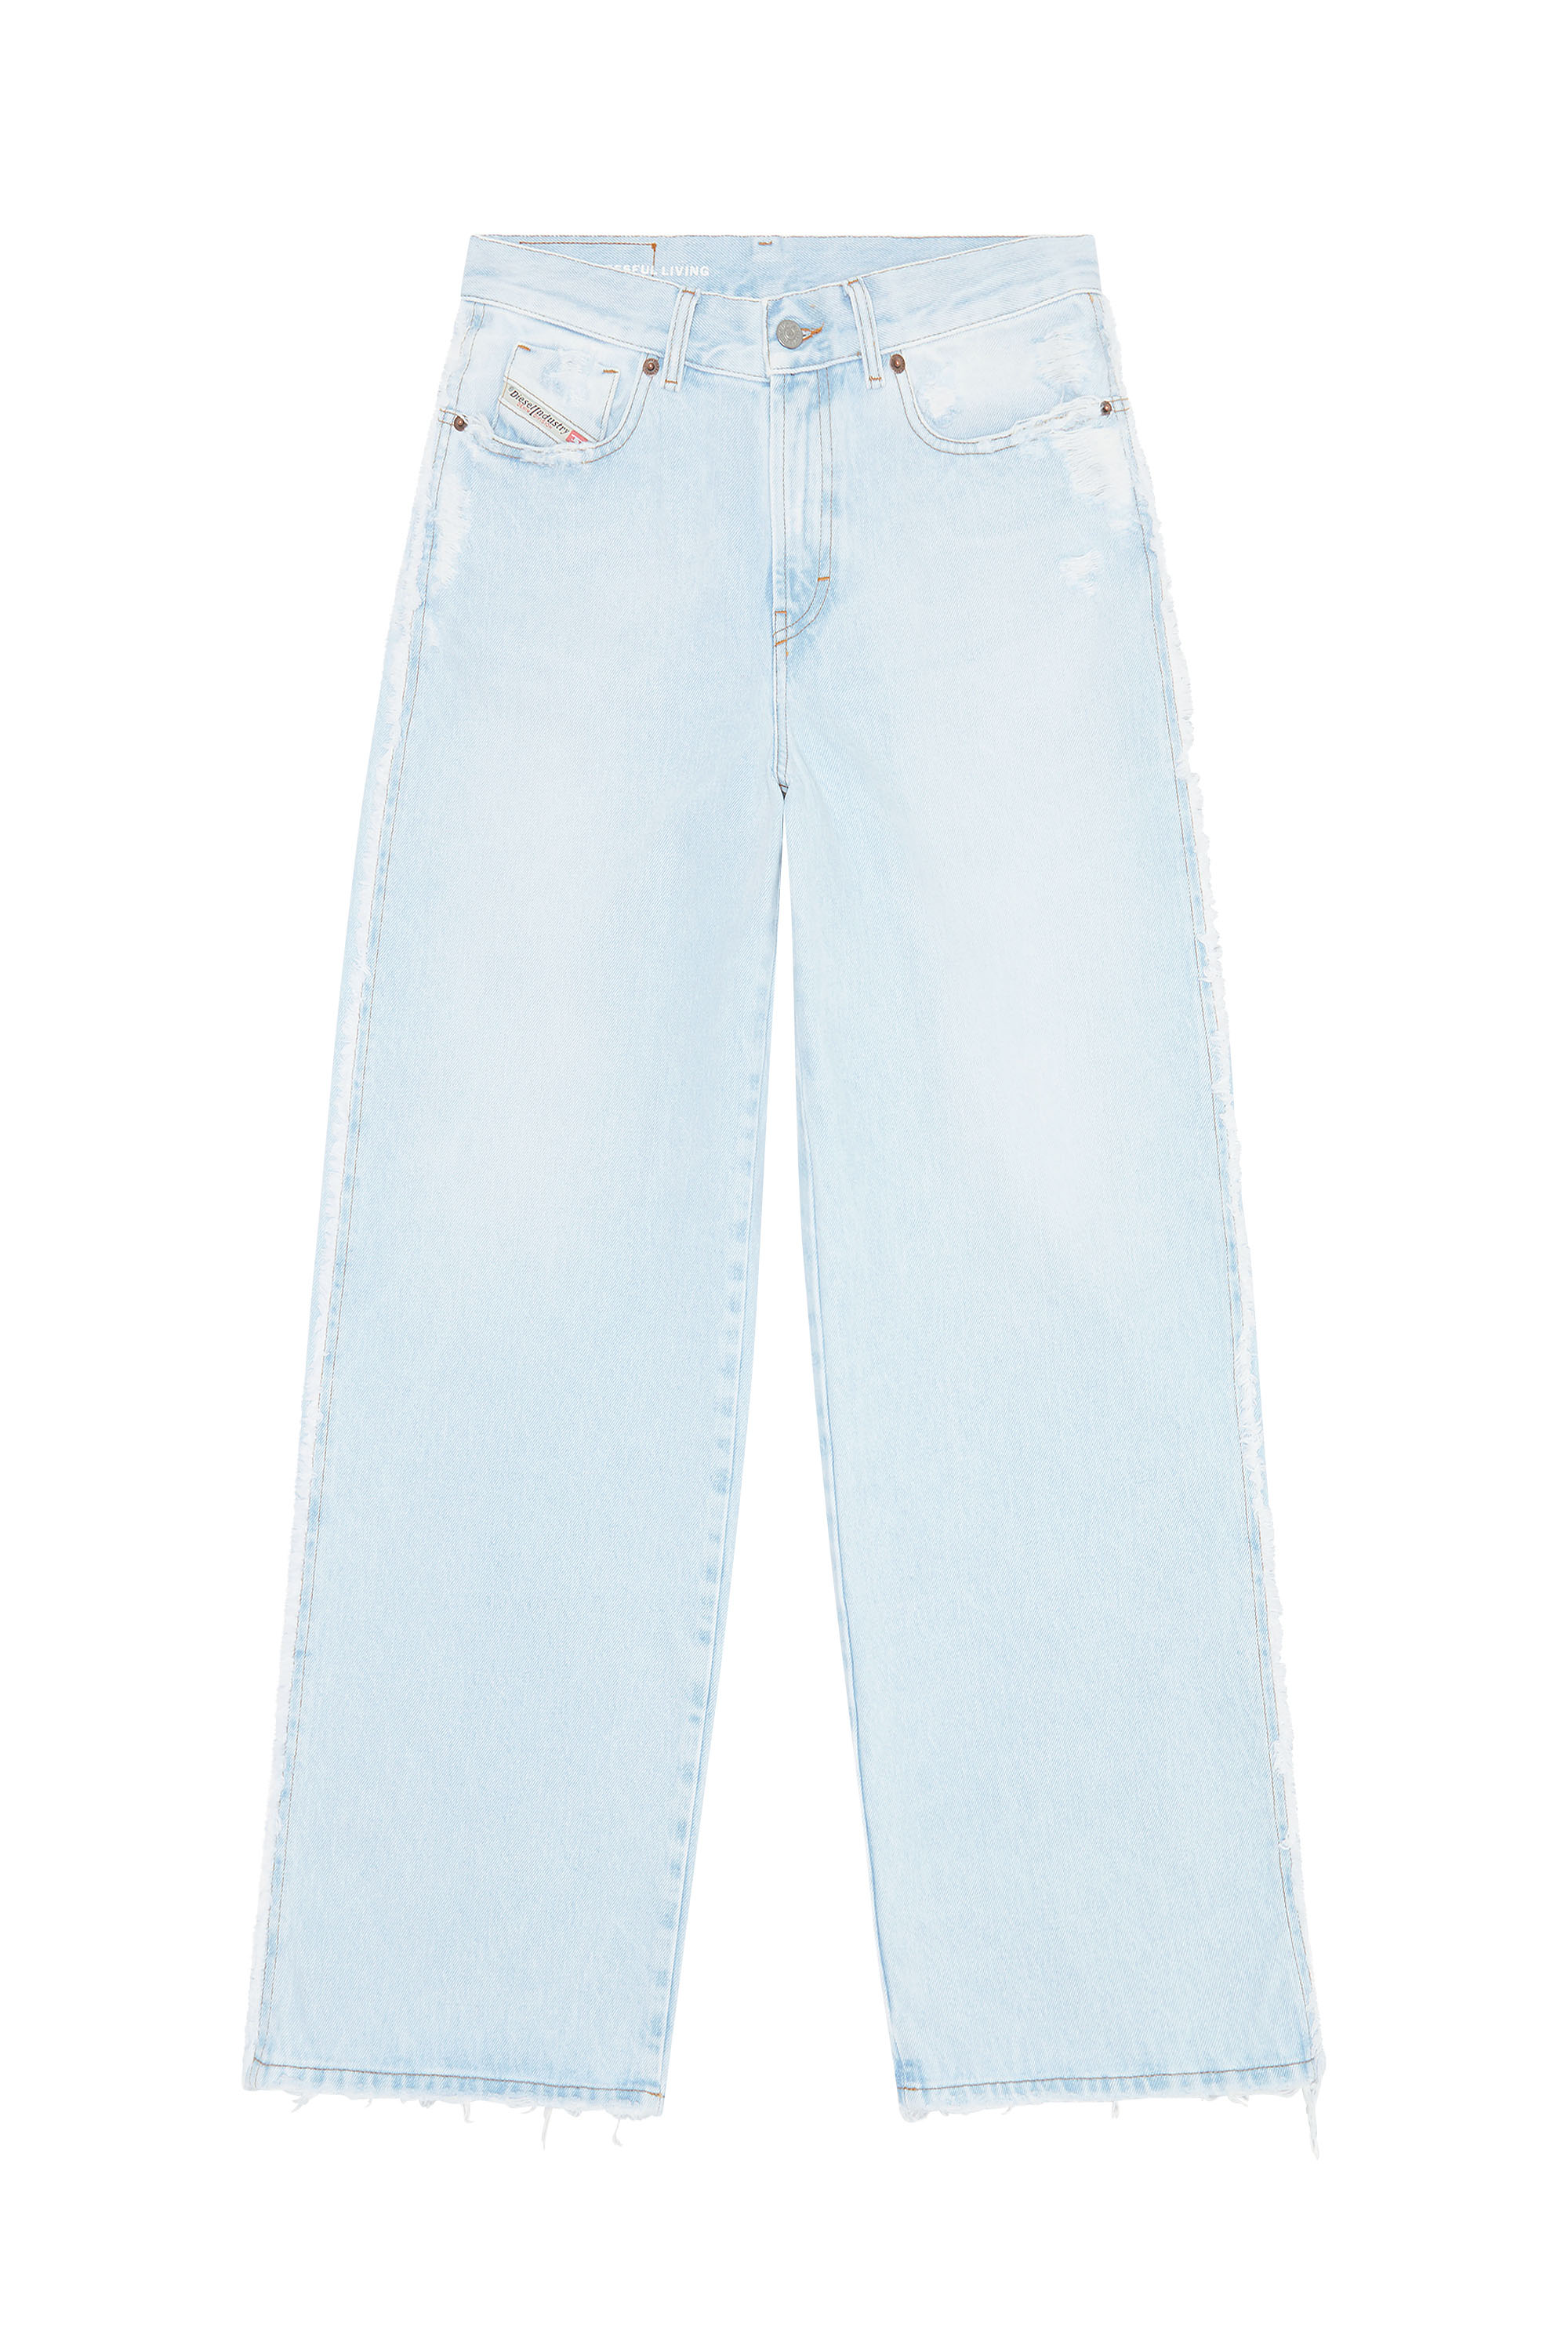 2000 Widee 007M7 Bootcut and Flare Jeans, Bleu Clair - Jeans